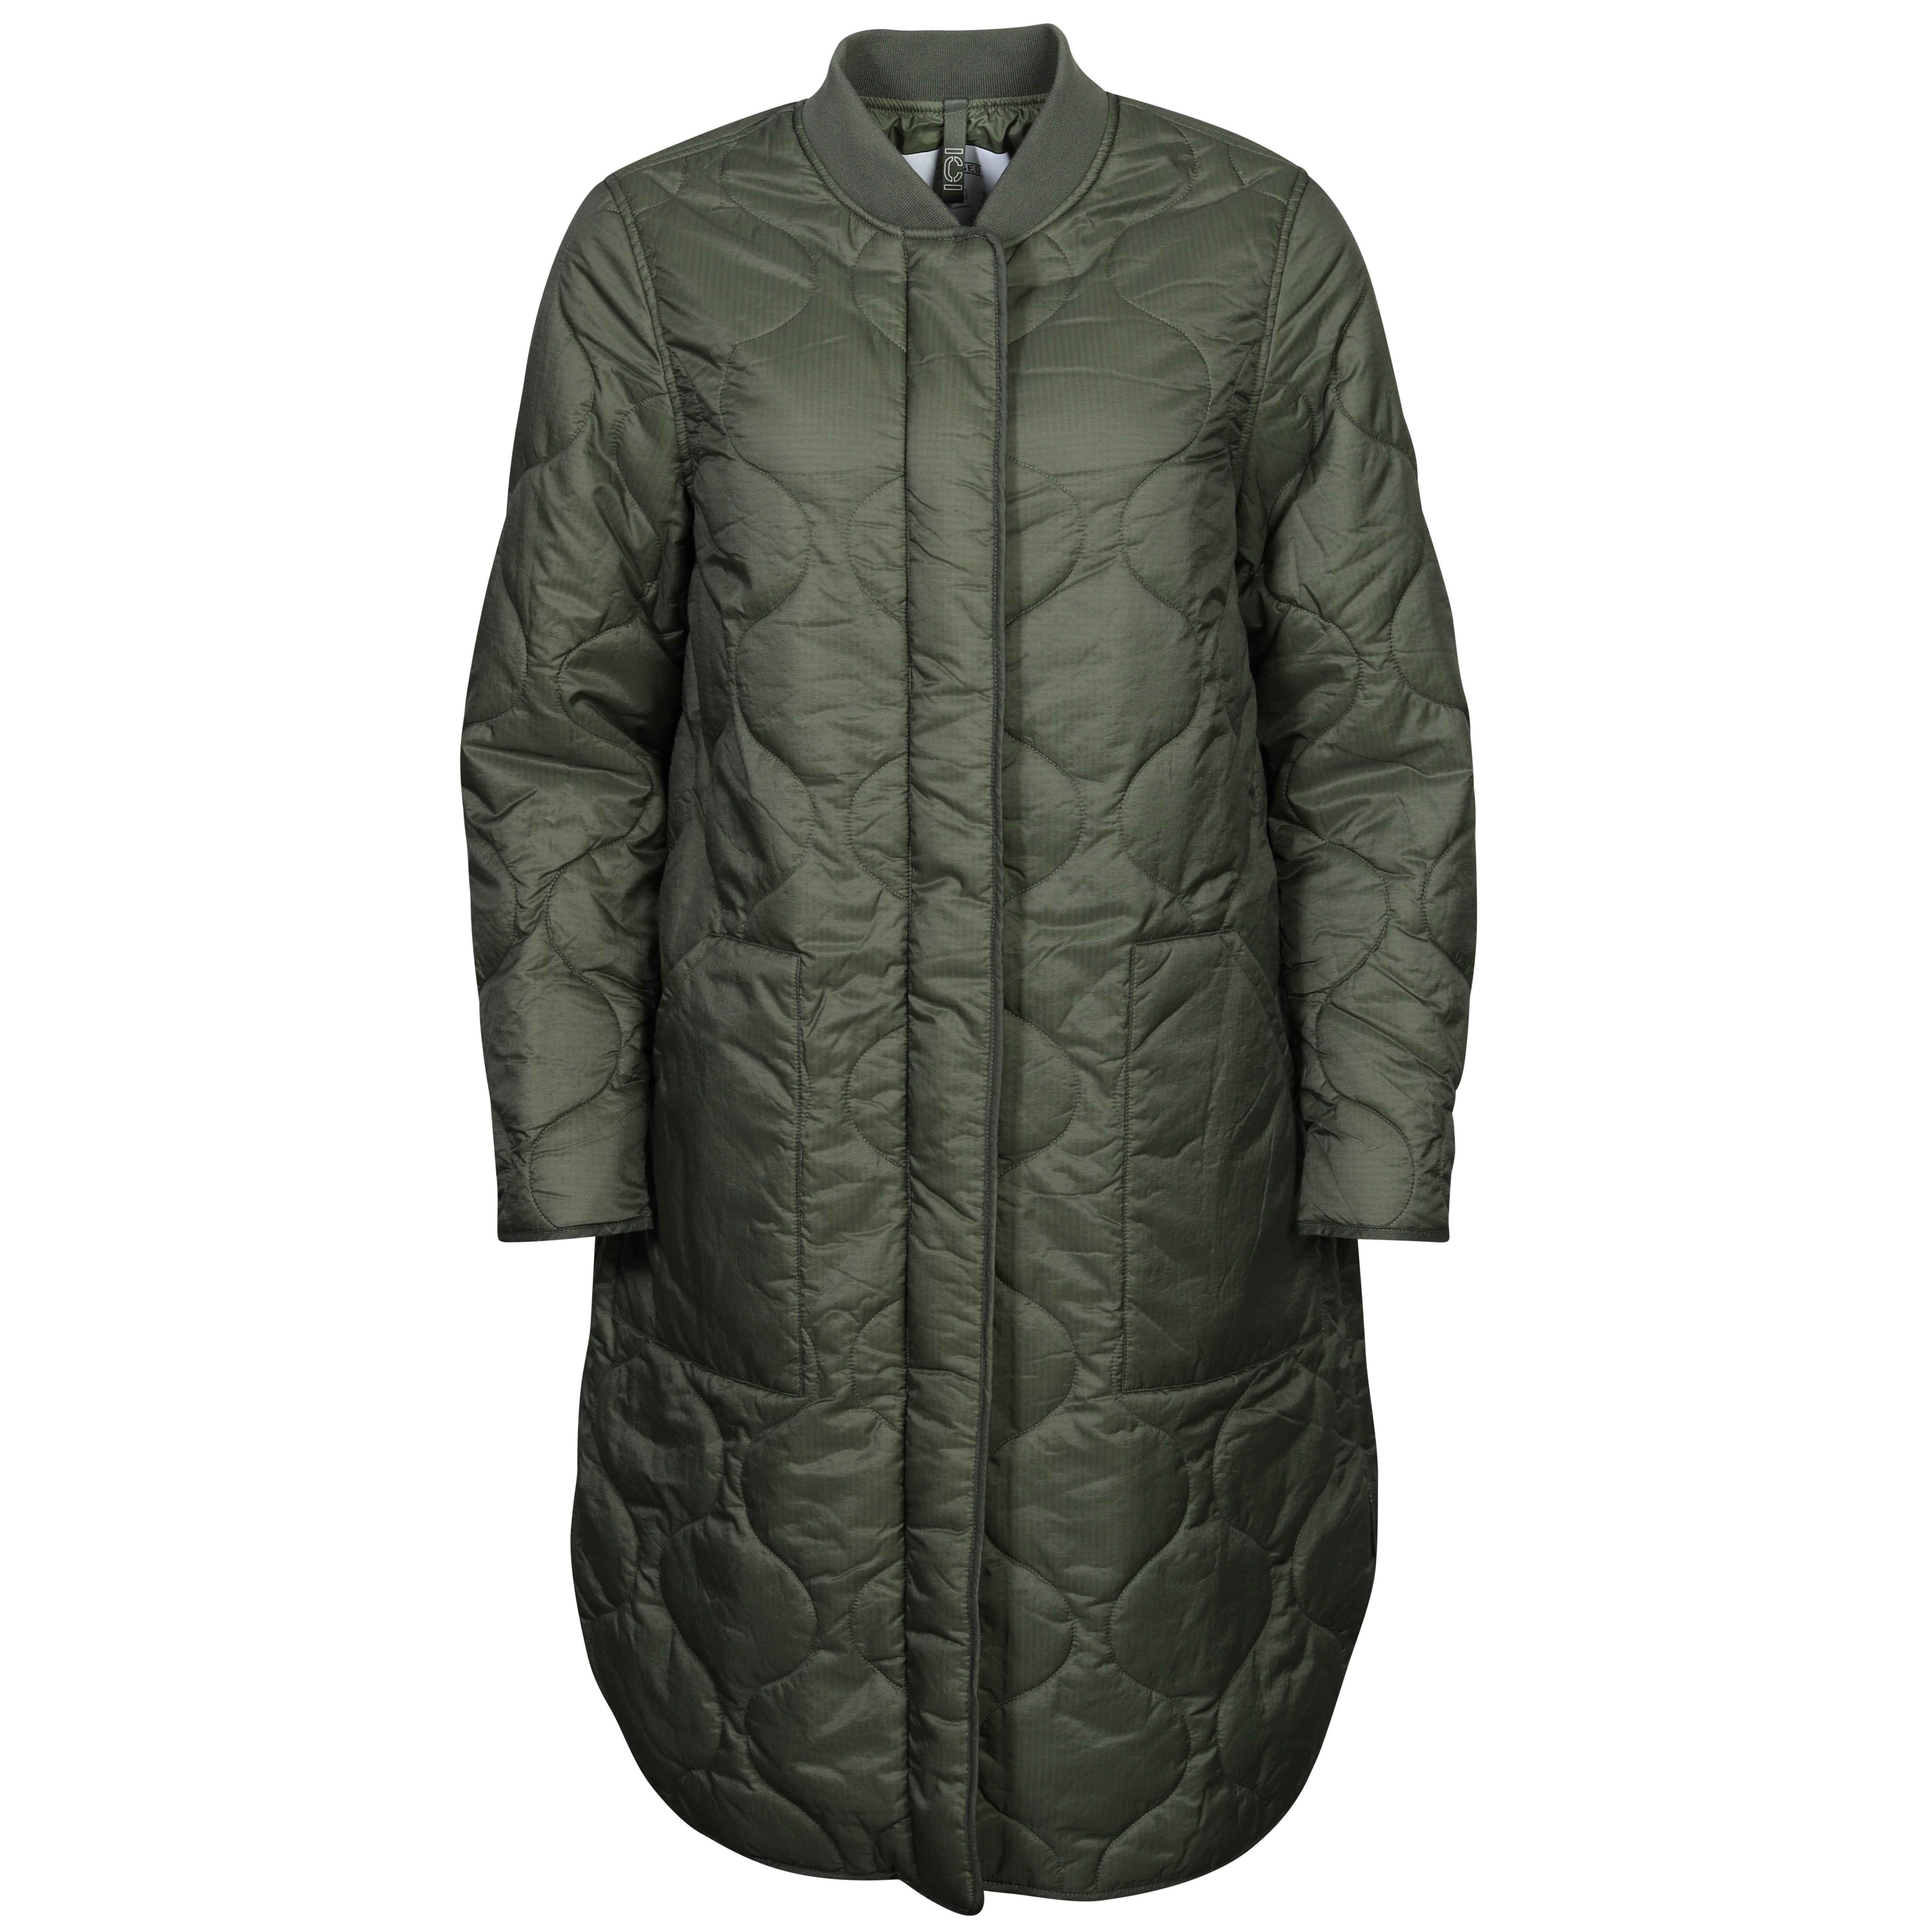 Closed Light Weight Nylon Coat in Army Green M